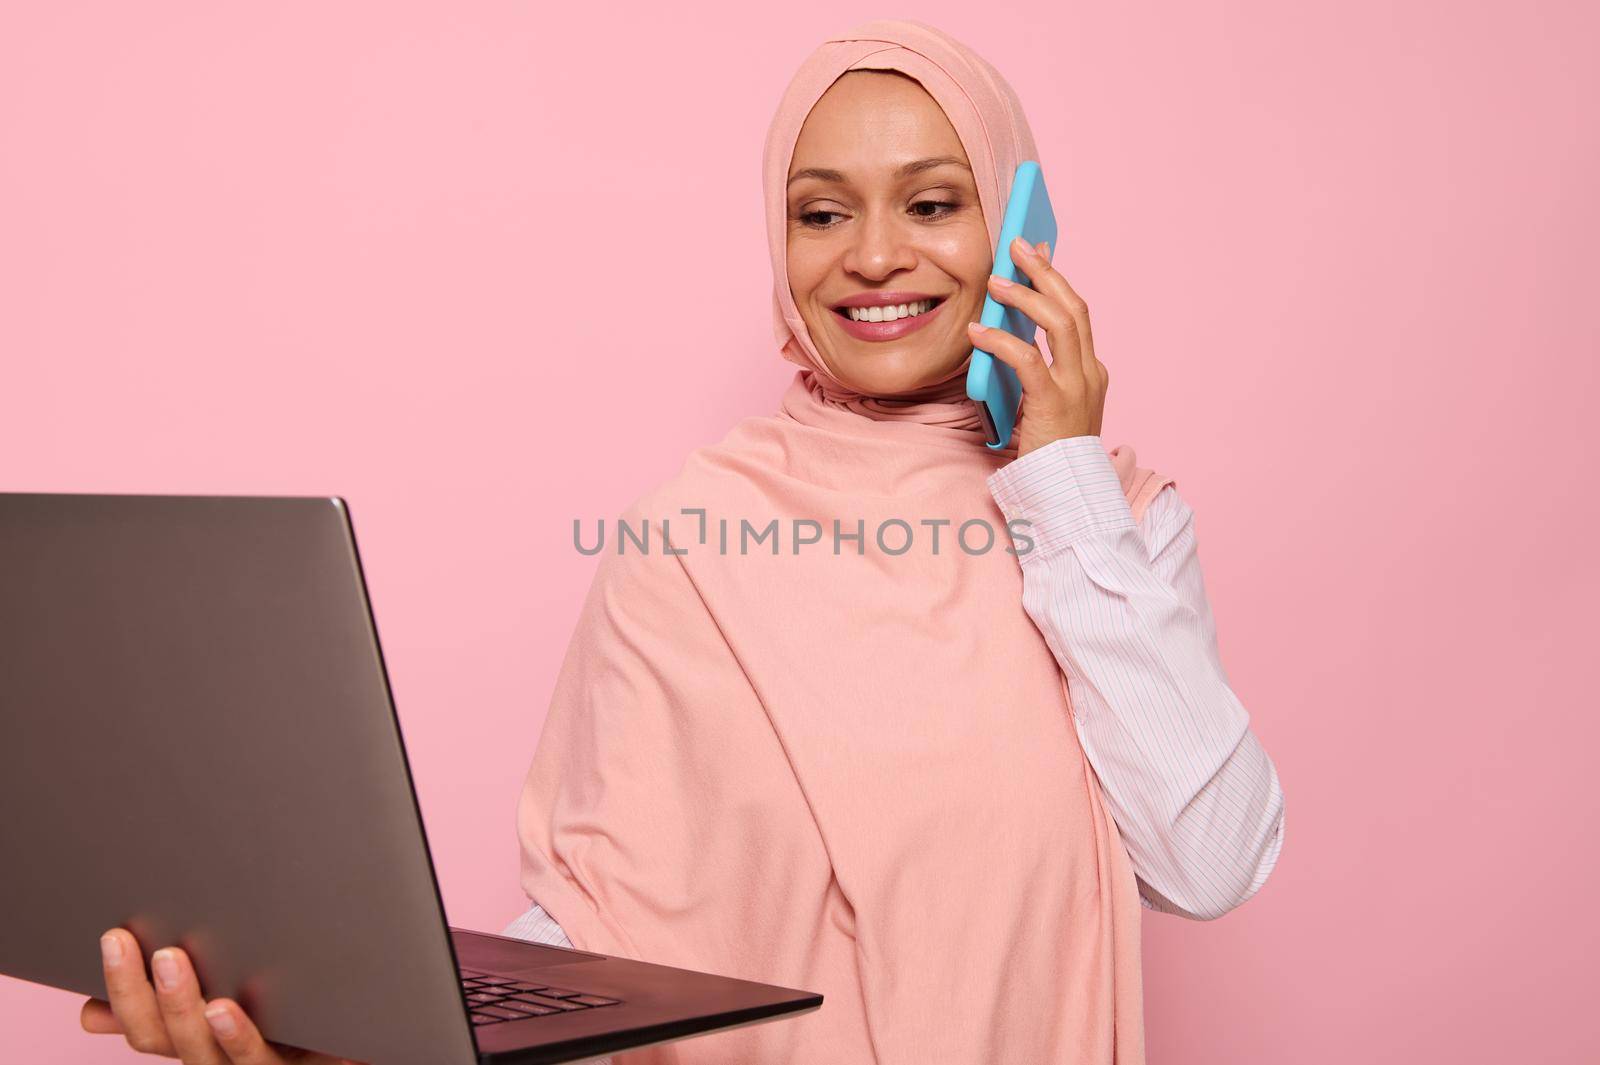 Close-up portrait of a beautiful Muslim Arab woman in pink hijab working on laptop, isolated on colored background with copy space. Successful programmer, IT female worker, start-up, business lady by artgf